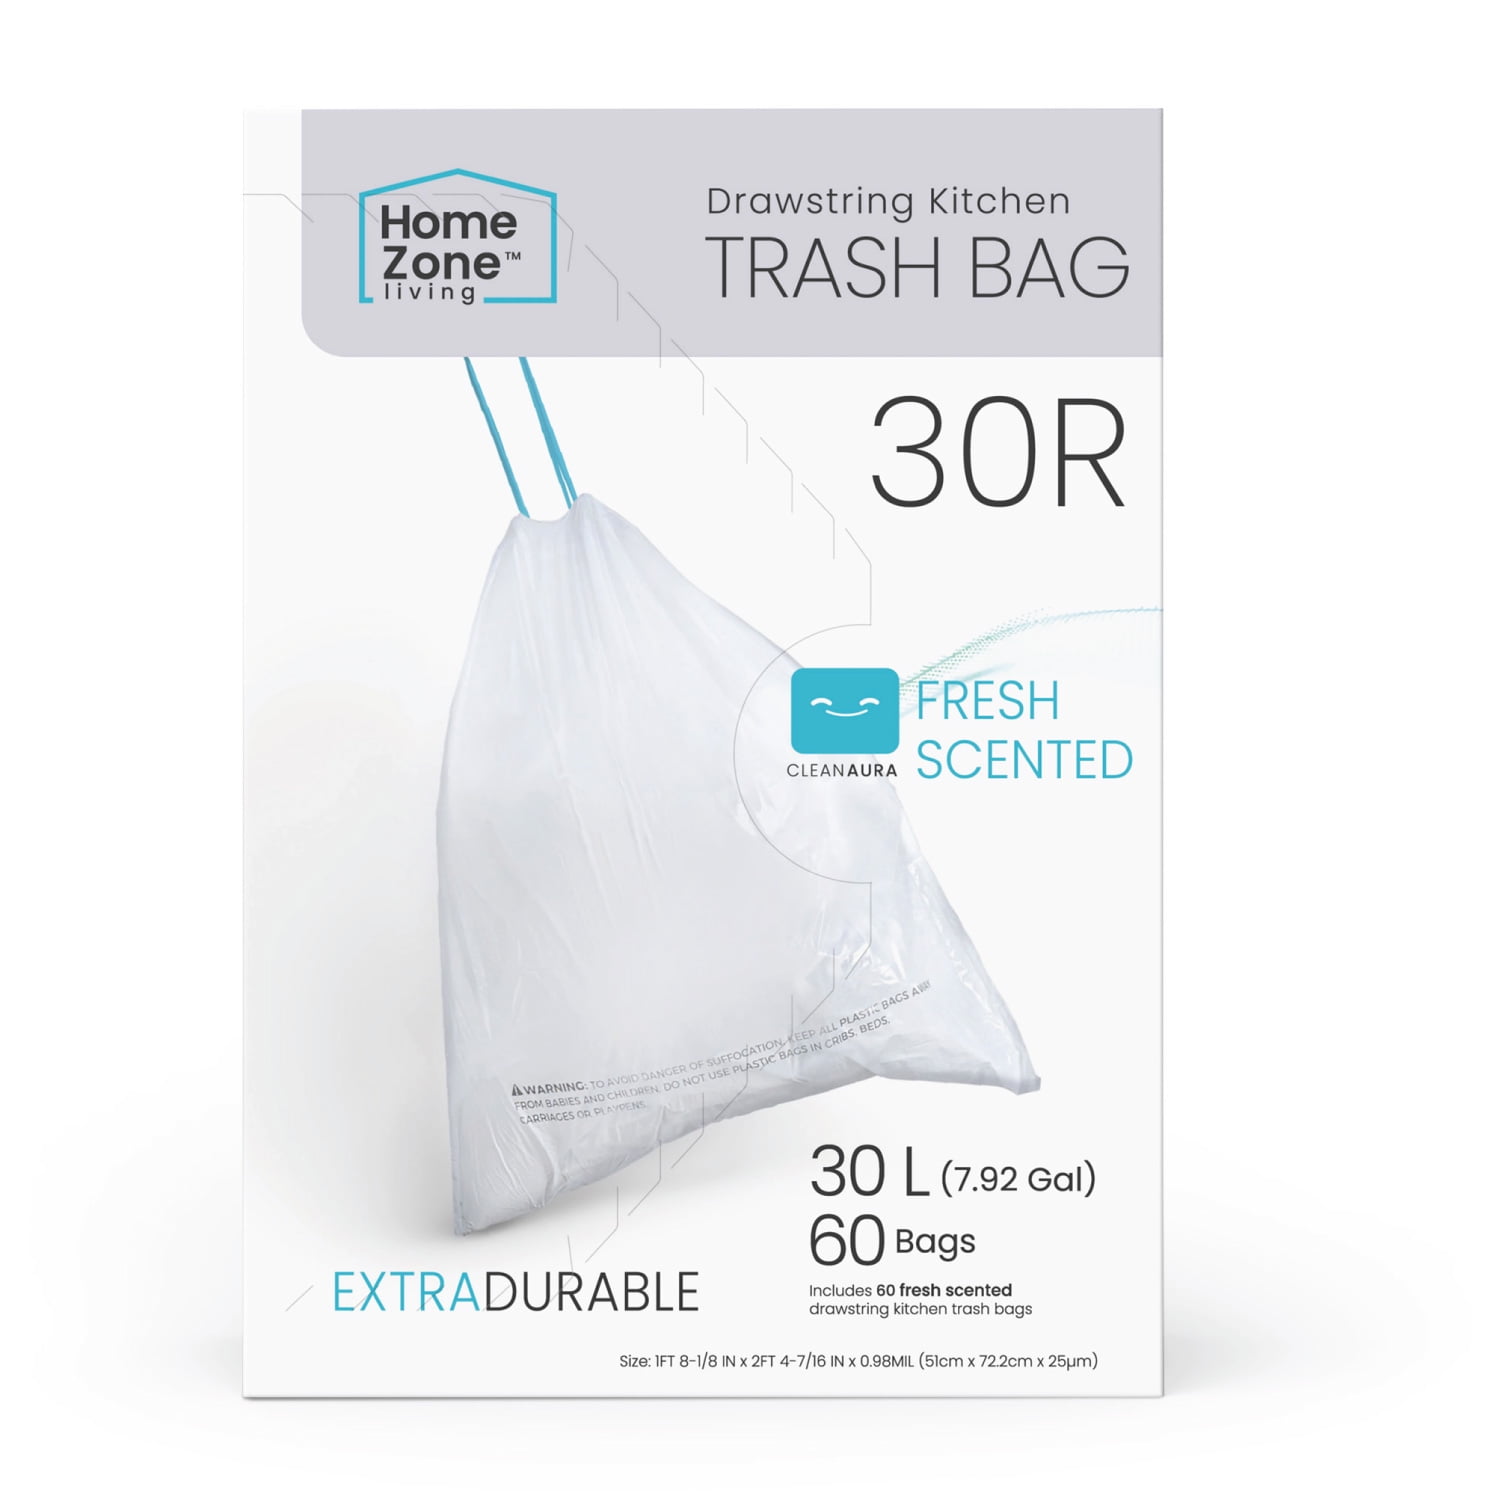  Ultrasac 8 Gallon Trash Bags - Pack of 400-22 x 22 - 1.0 Mil  (eq) For Home, Bathroom, & Office : Health & Household